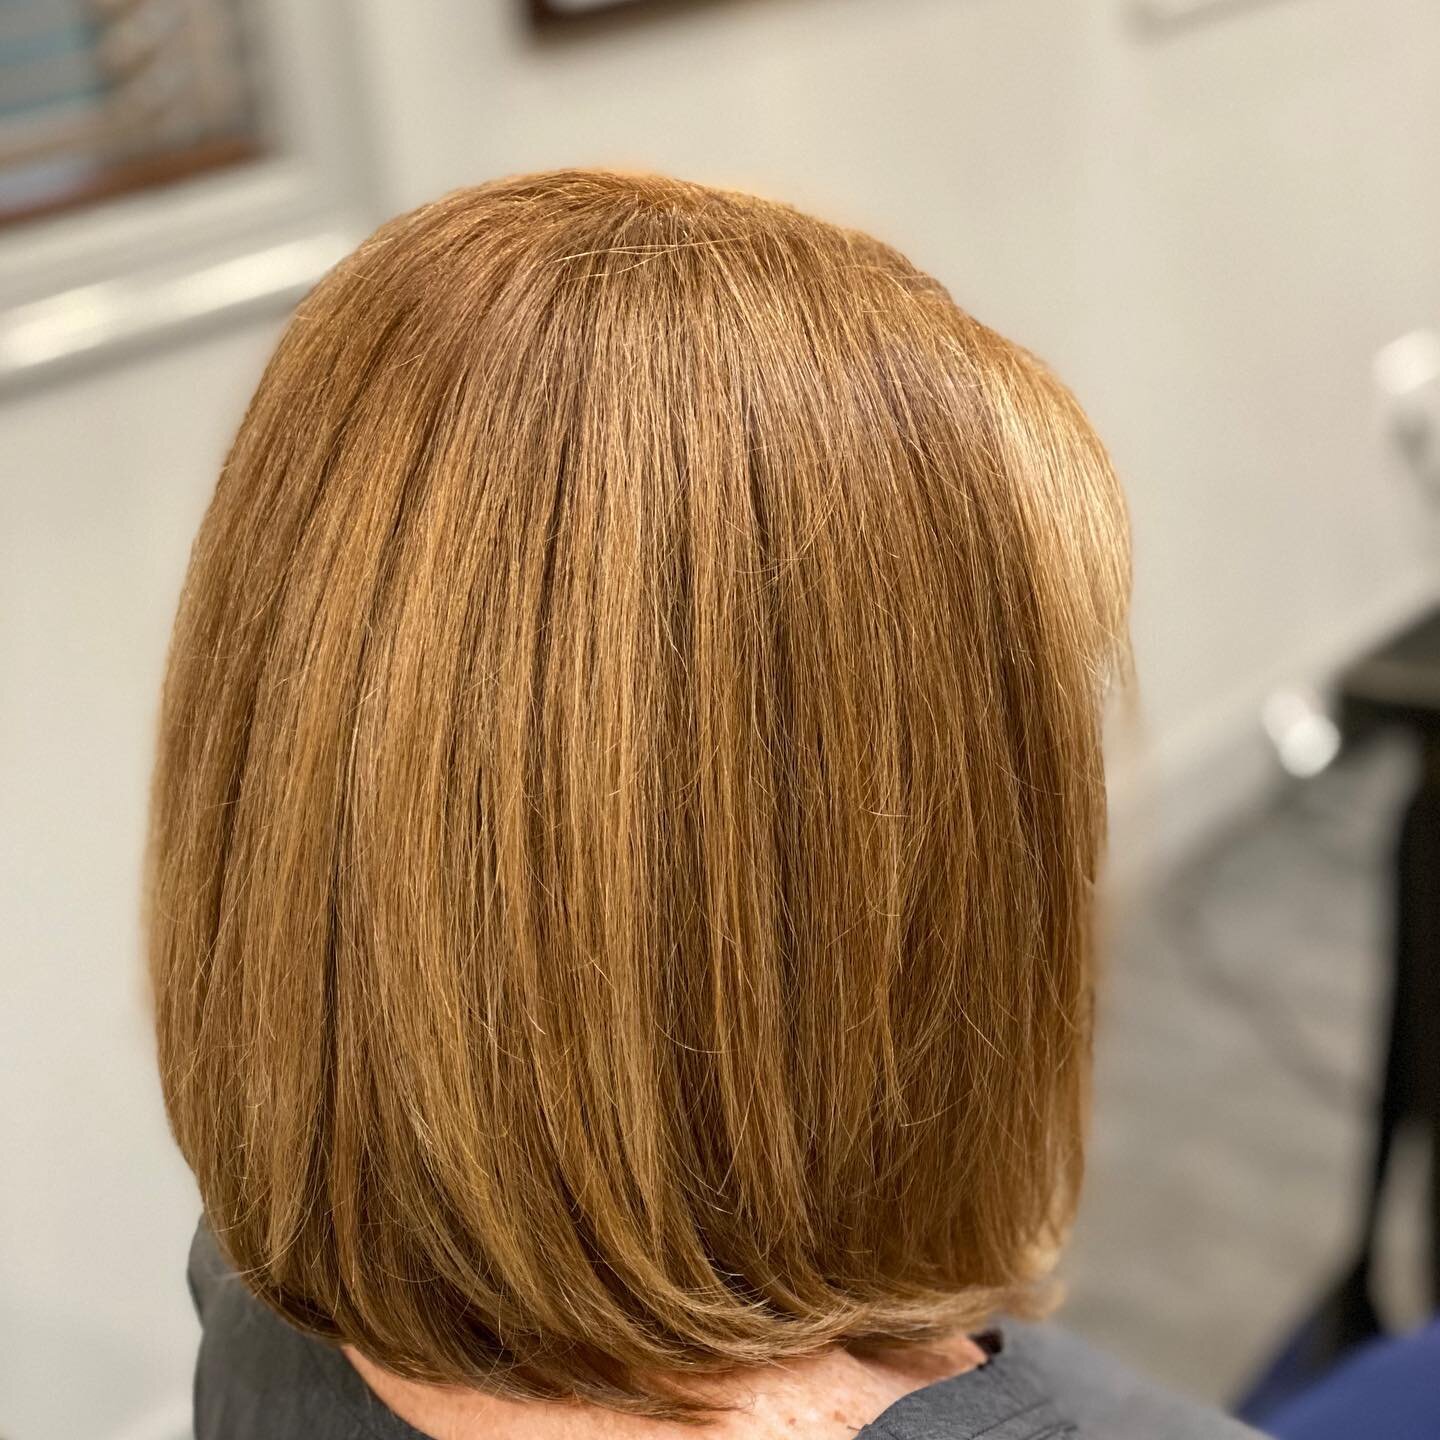 No more roots! Gold on gold dimensional color. Healthy gorgeous hair complements to Milkshake creative color,  z-one concept, and Olaplex! #acceptingnewclients #bookyourappointment #smallbusinessowner #smallsafesalon#hellobeautiful #easthamptonmassac